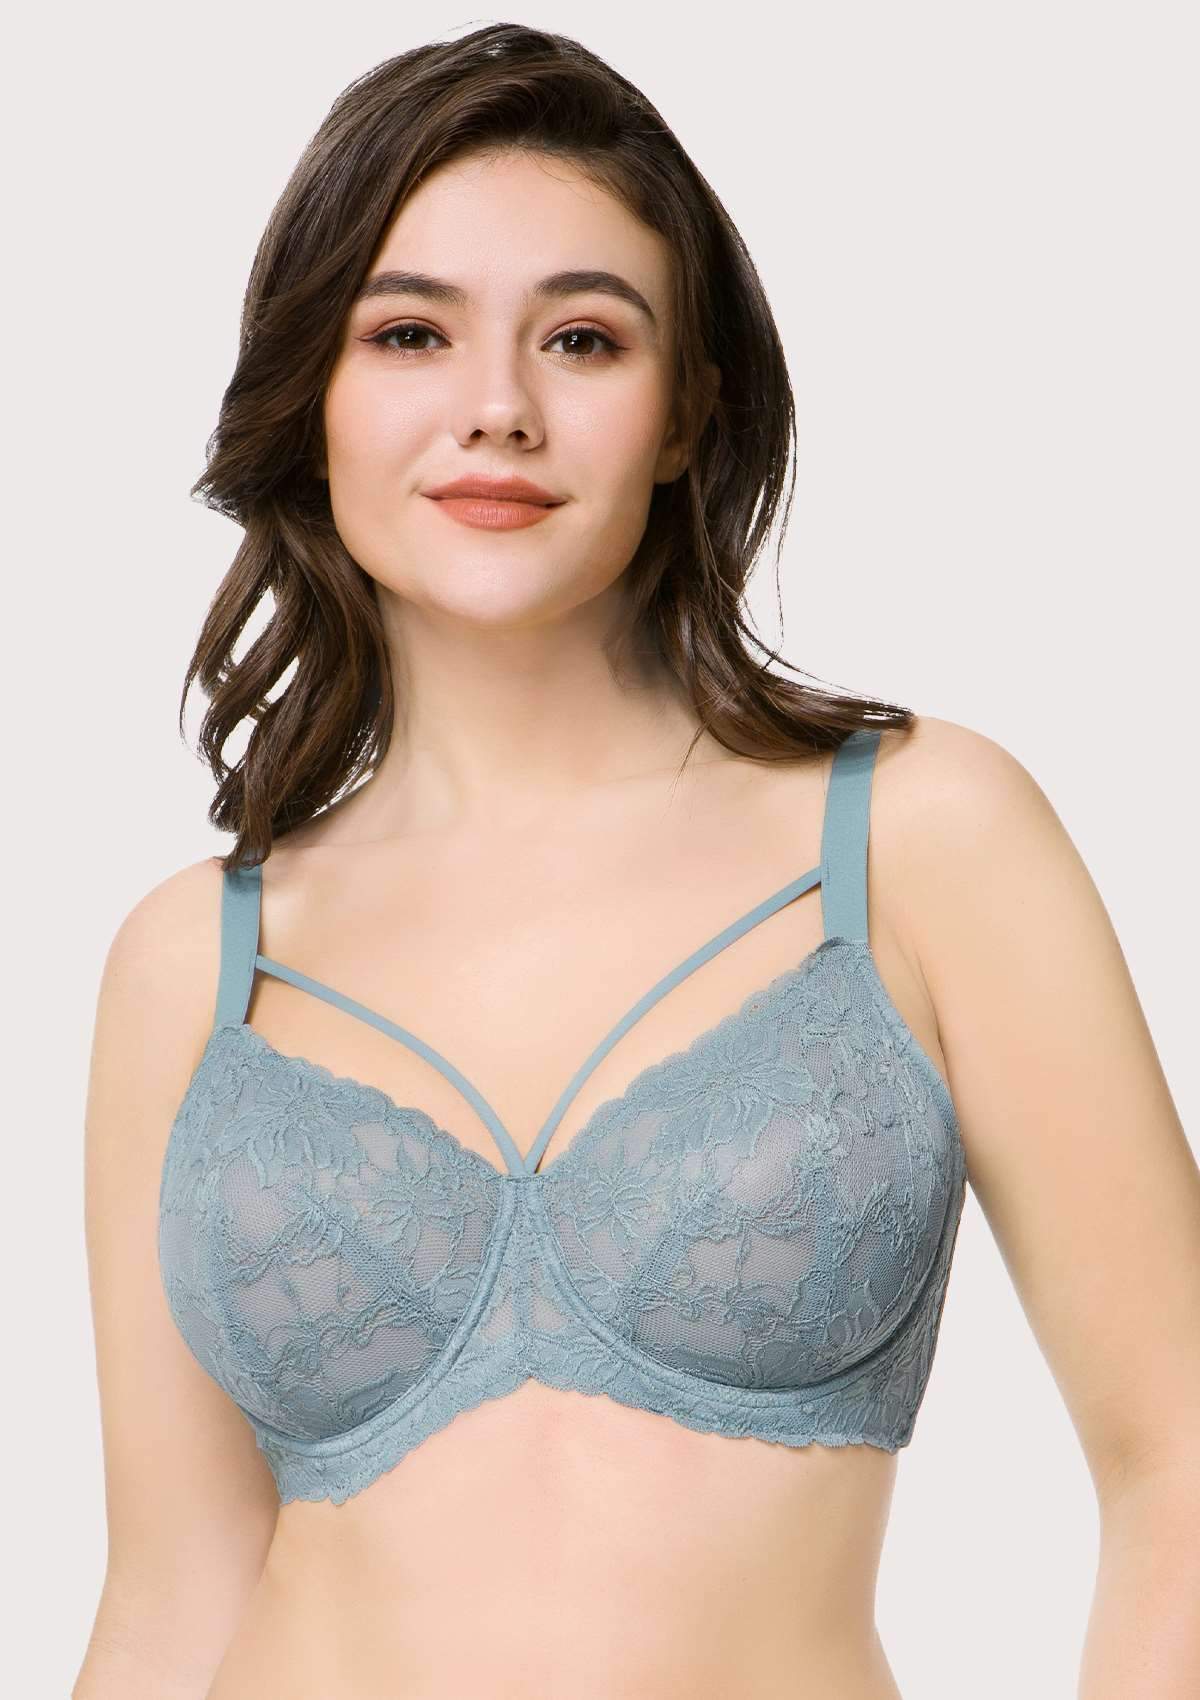 HSIA Pretty In Petals Unlined Lace Bra: Comfortable And Supportive Bra - Crystal Blue / 38 / DDD/F